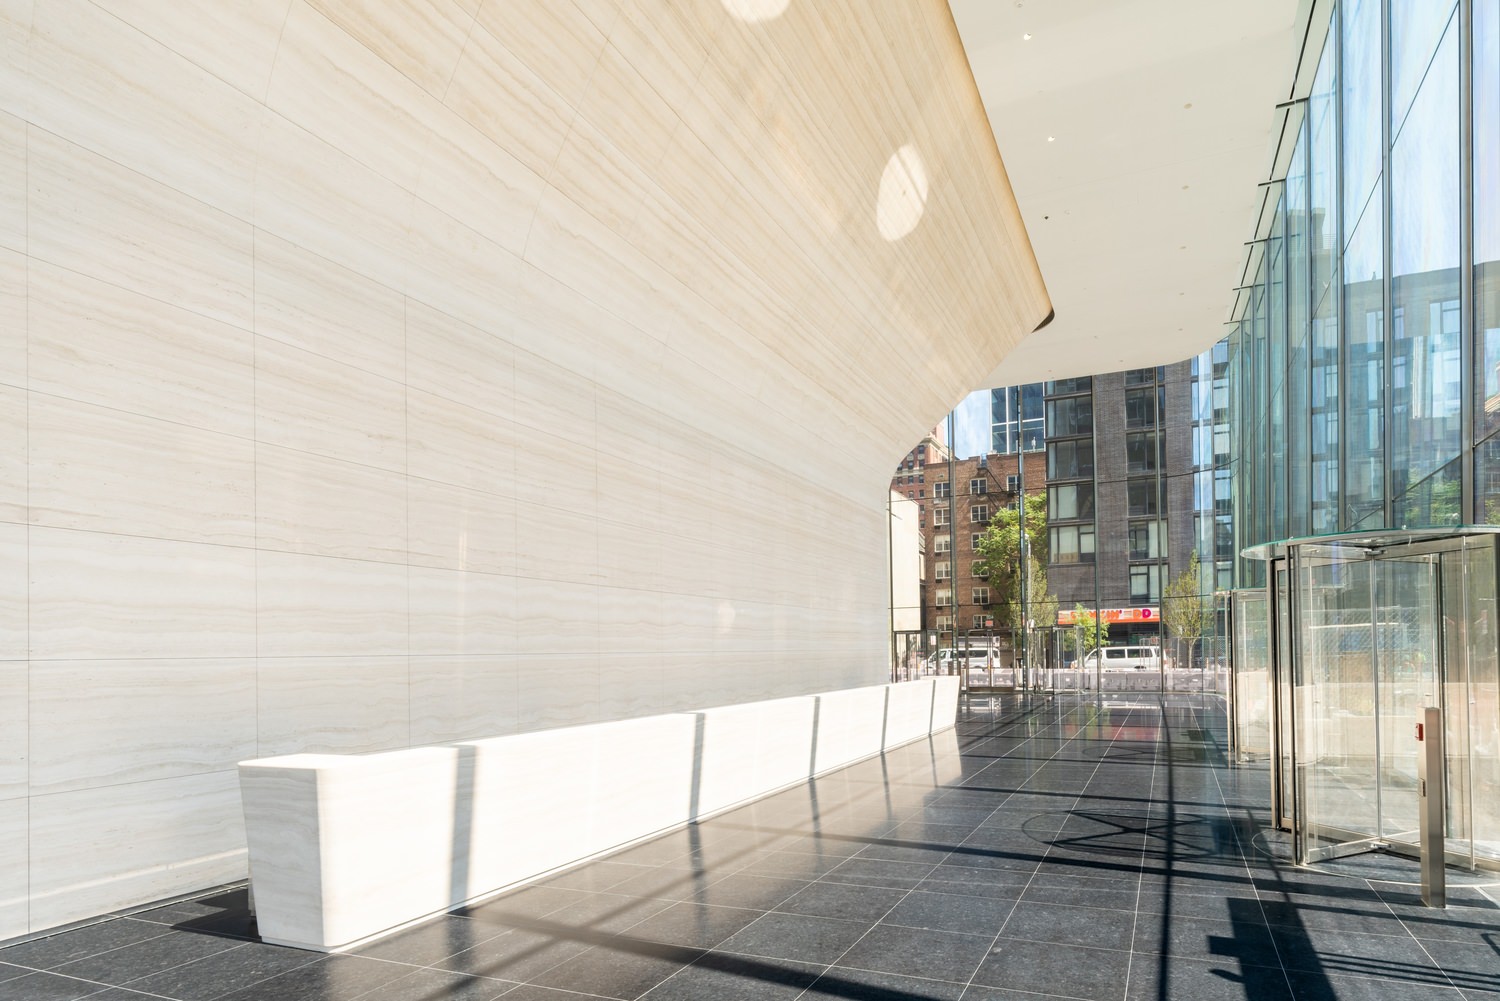 Outdoor image of a glass building where the floor are installed with white cube tiles